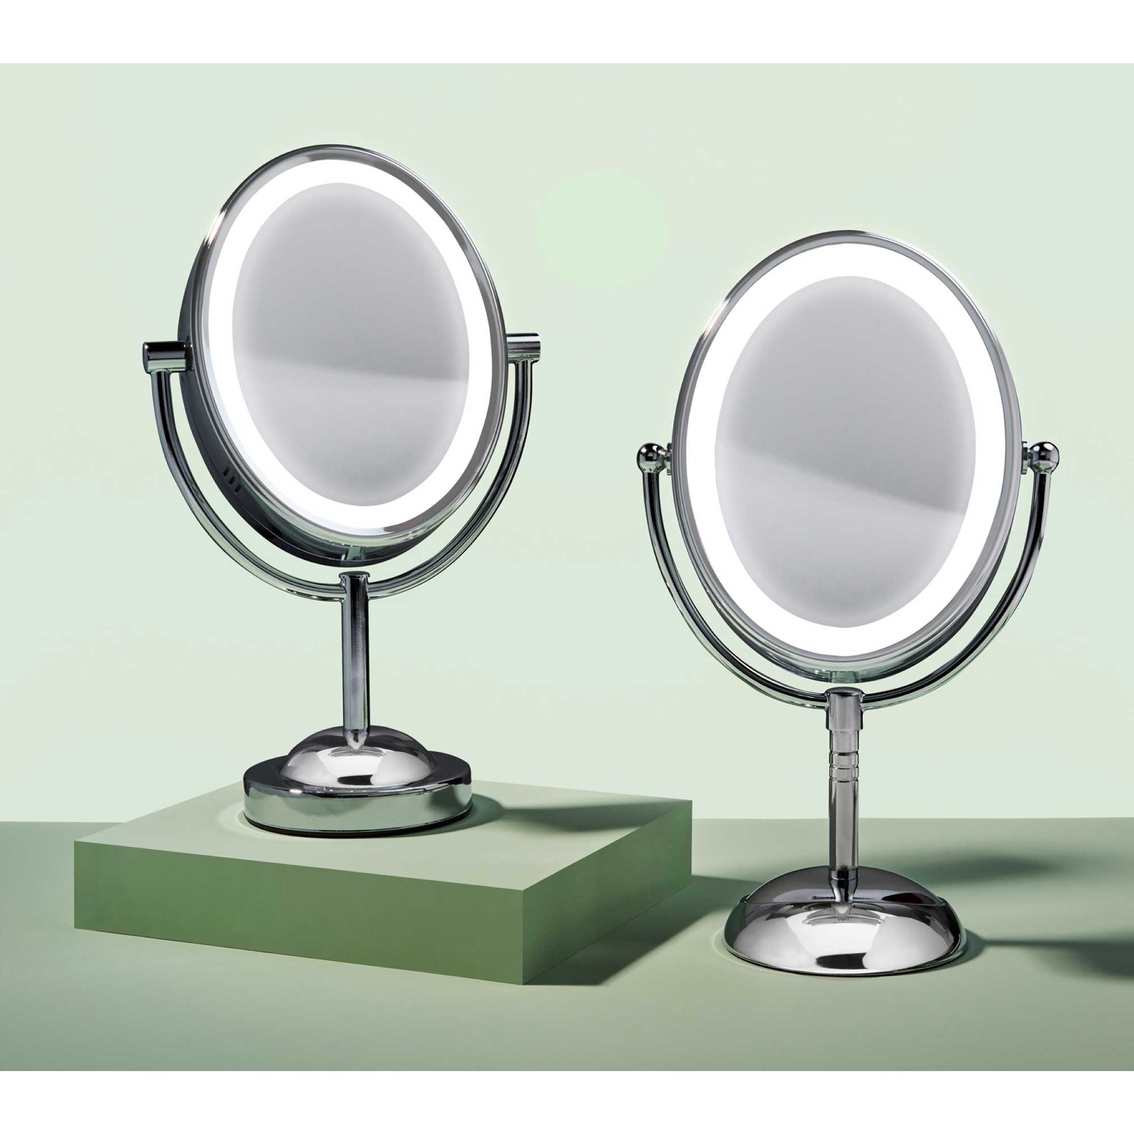 Conair Double Sided Lighted Oval Mirror - Image 7 of 9